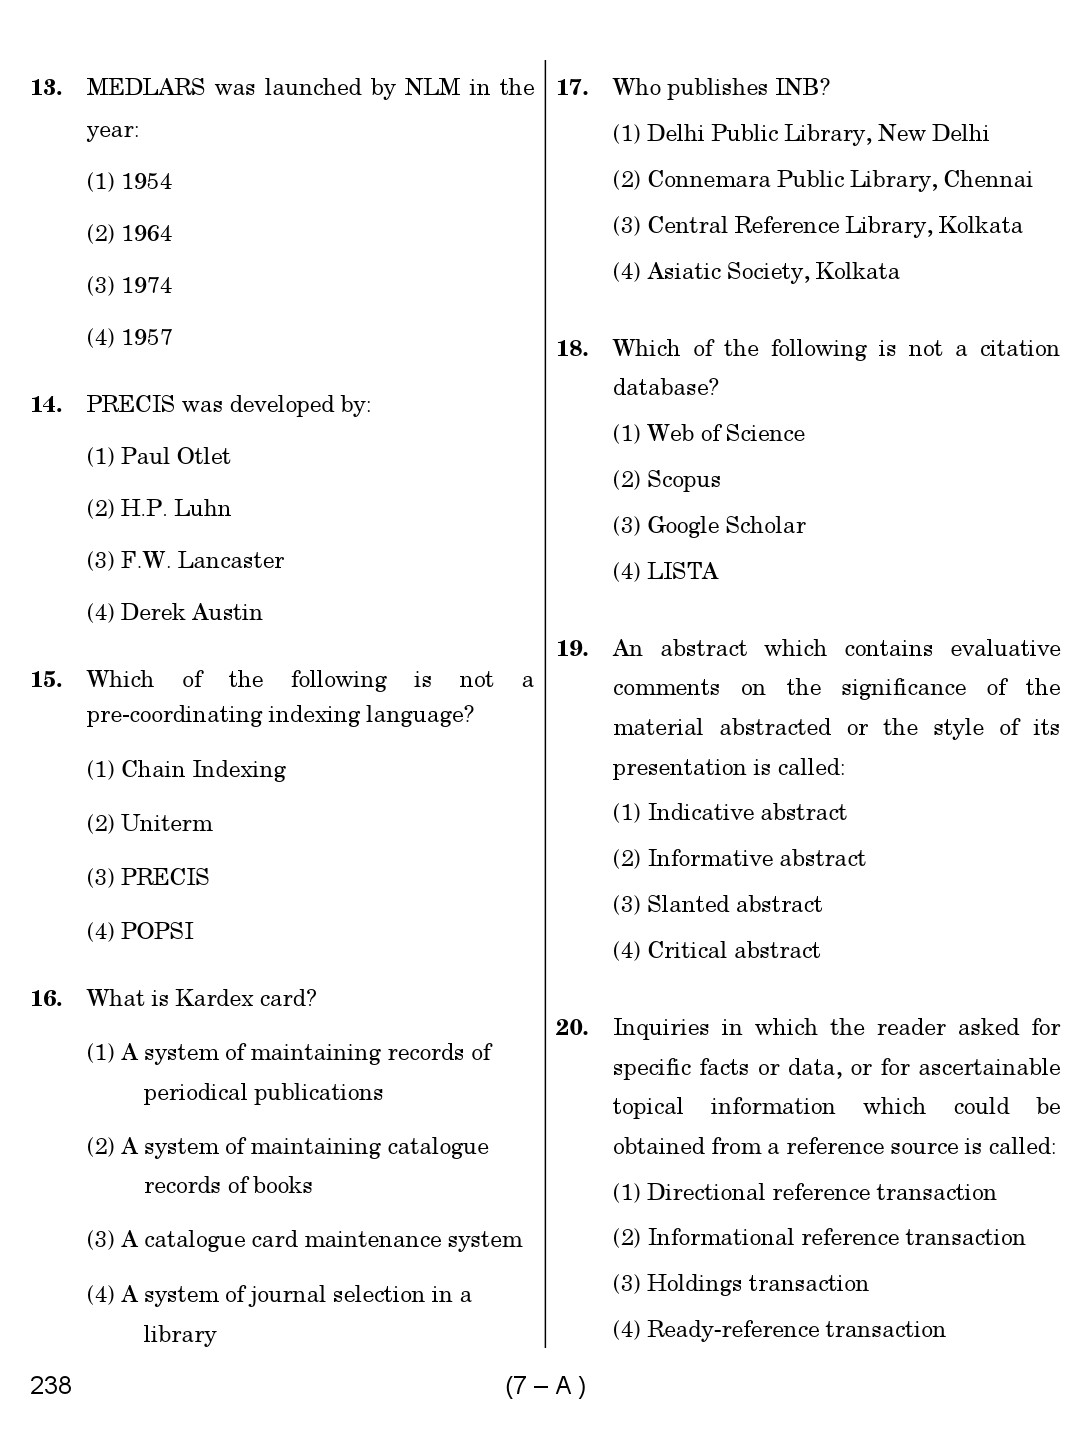 Karnataka PSC 238 Specific Paper II Librarian Exam Sample Question Paper 7